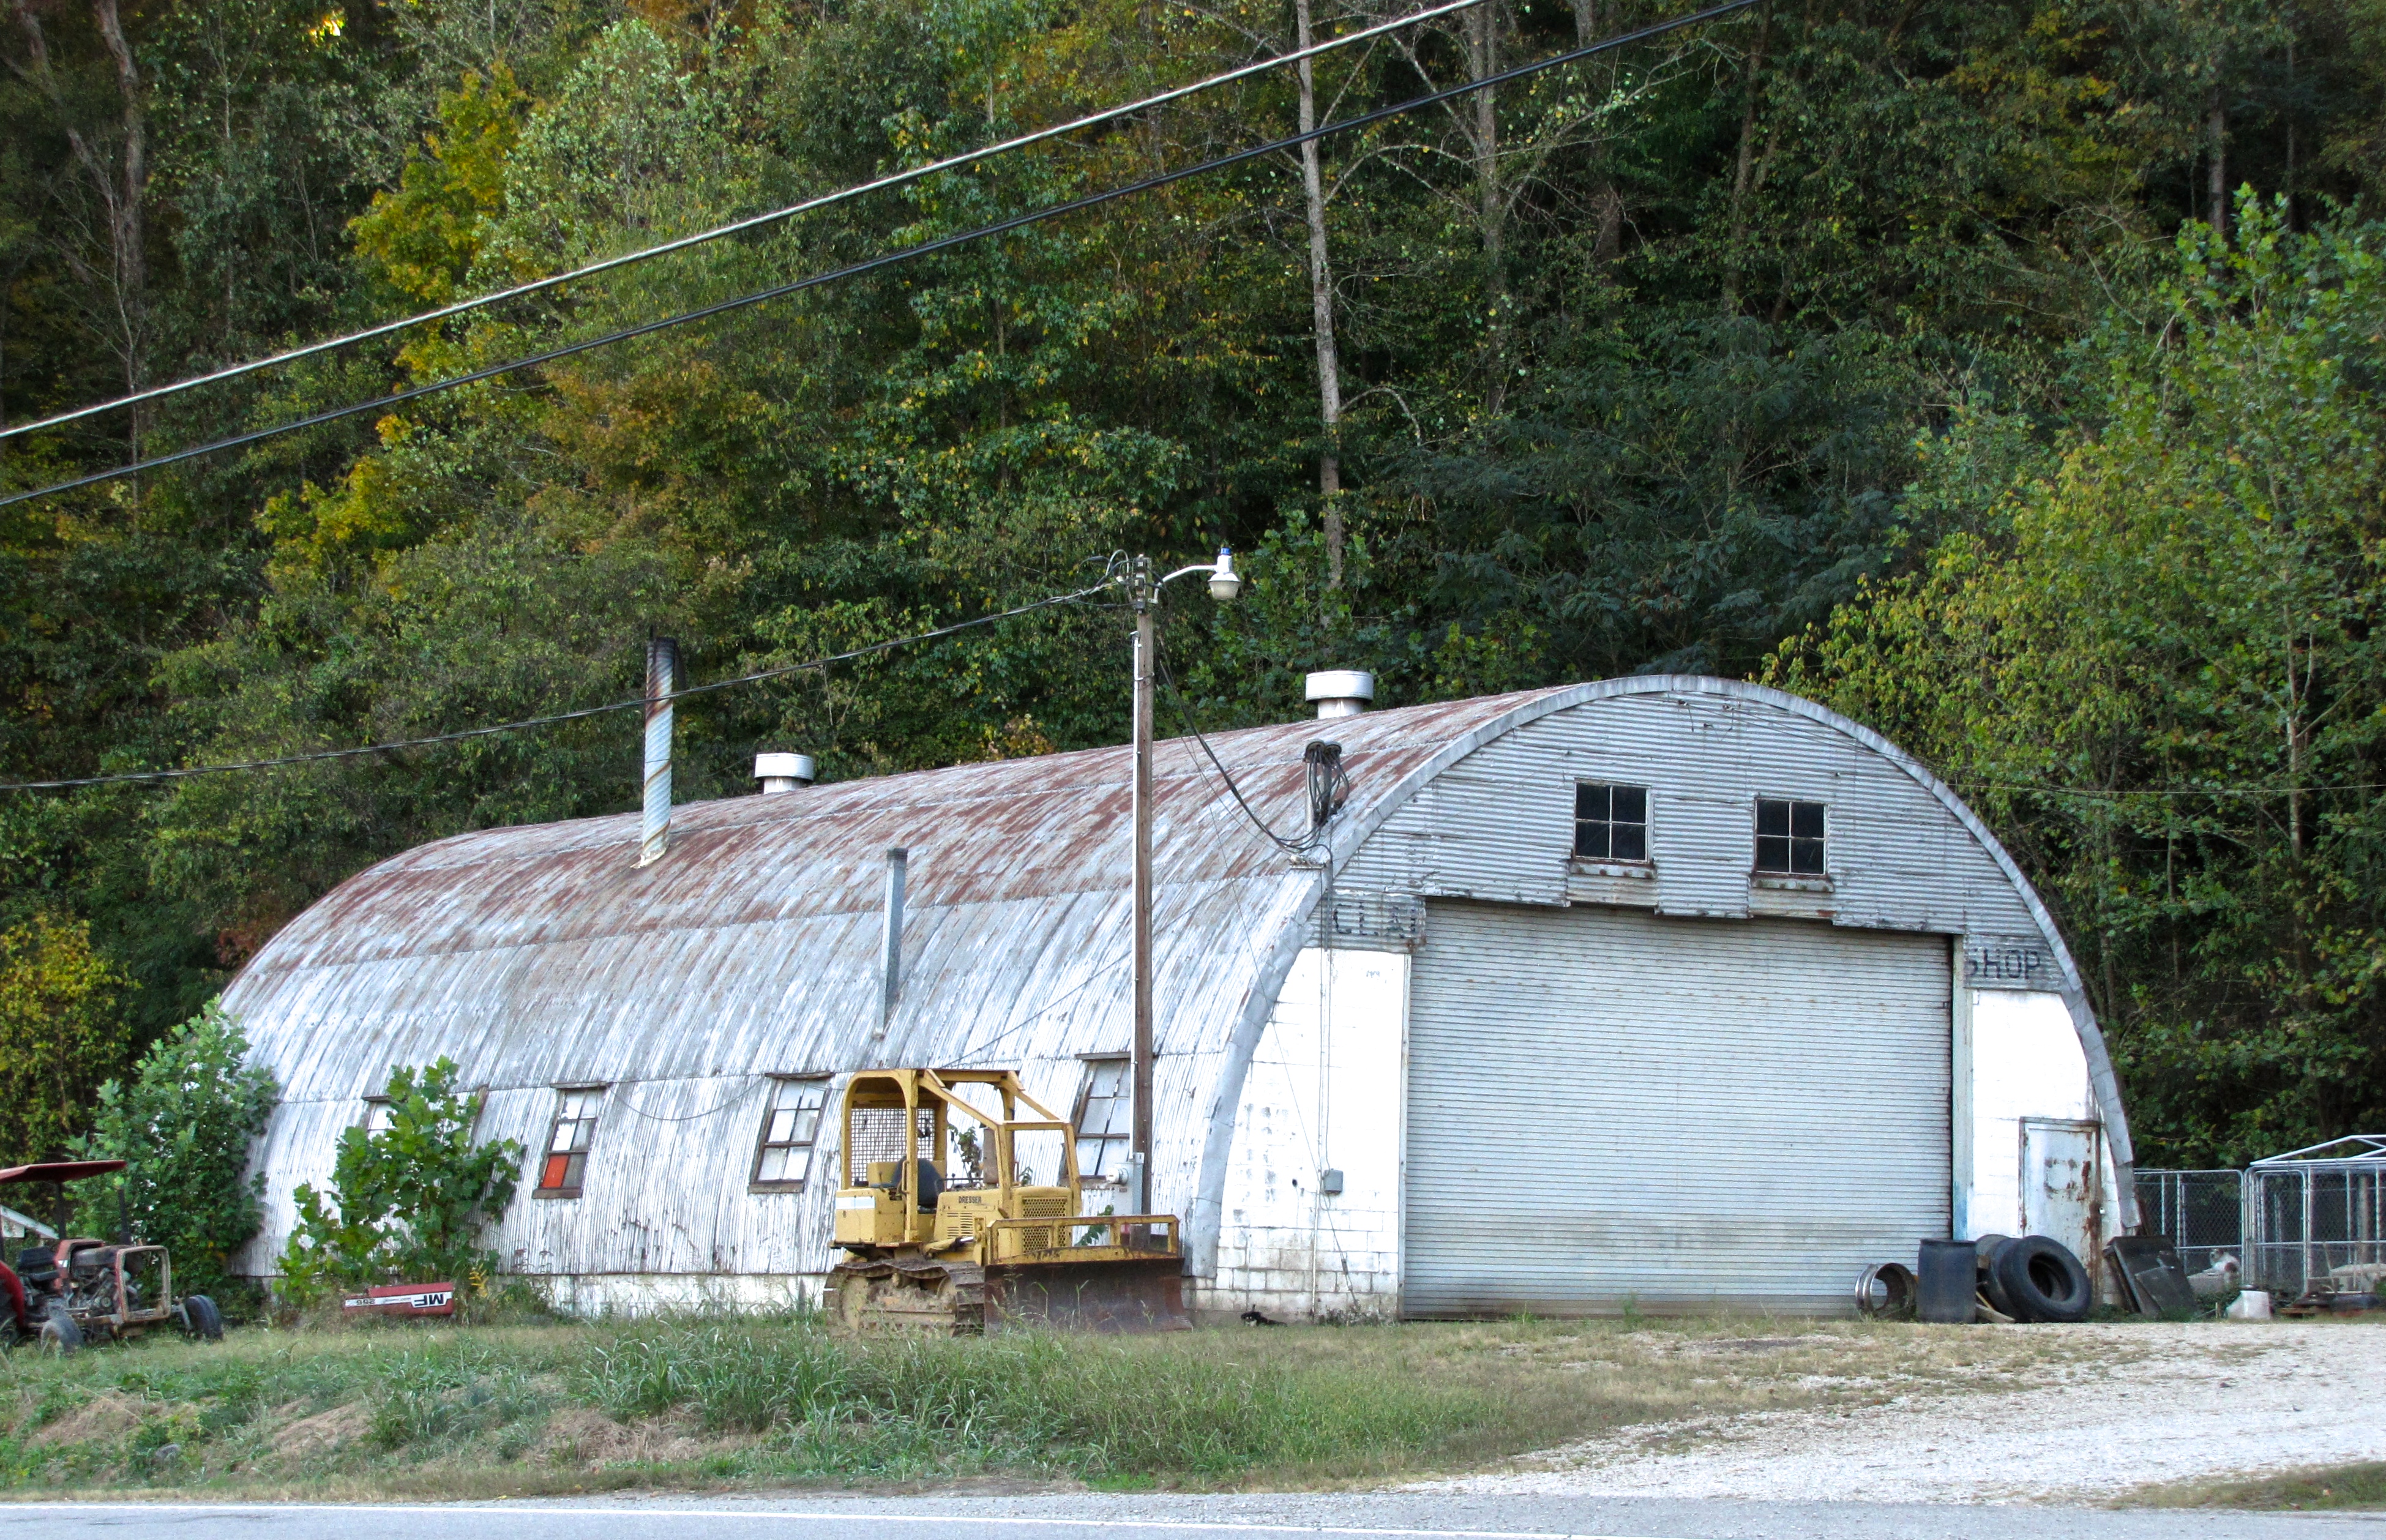 quonset hut in Hanover, PA